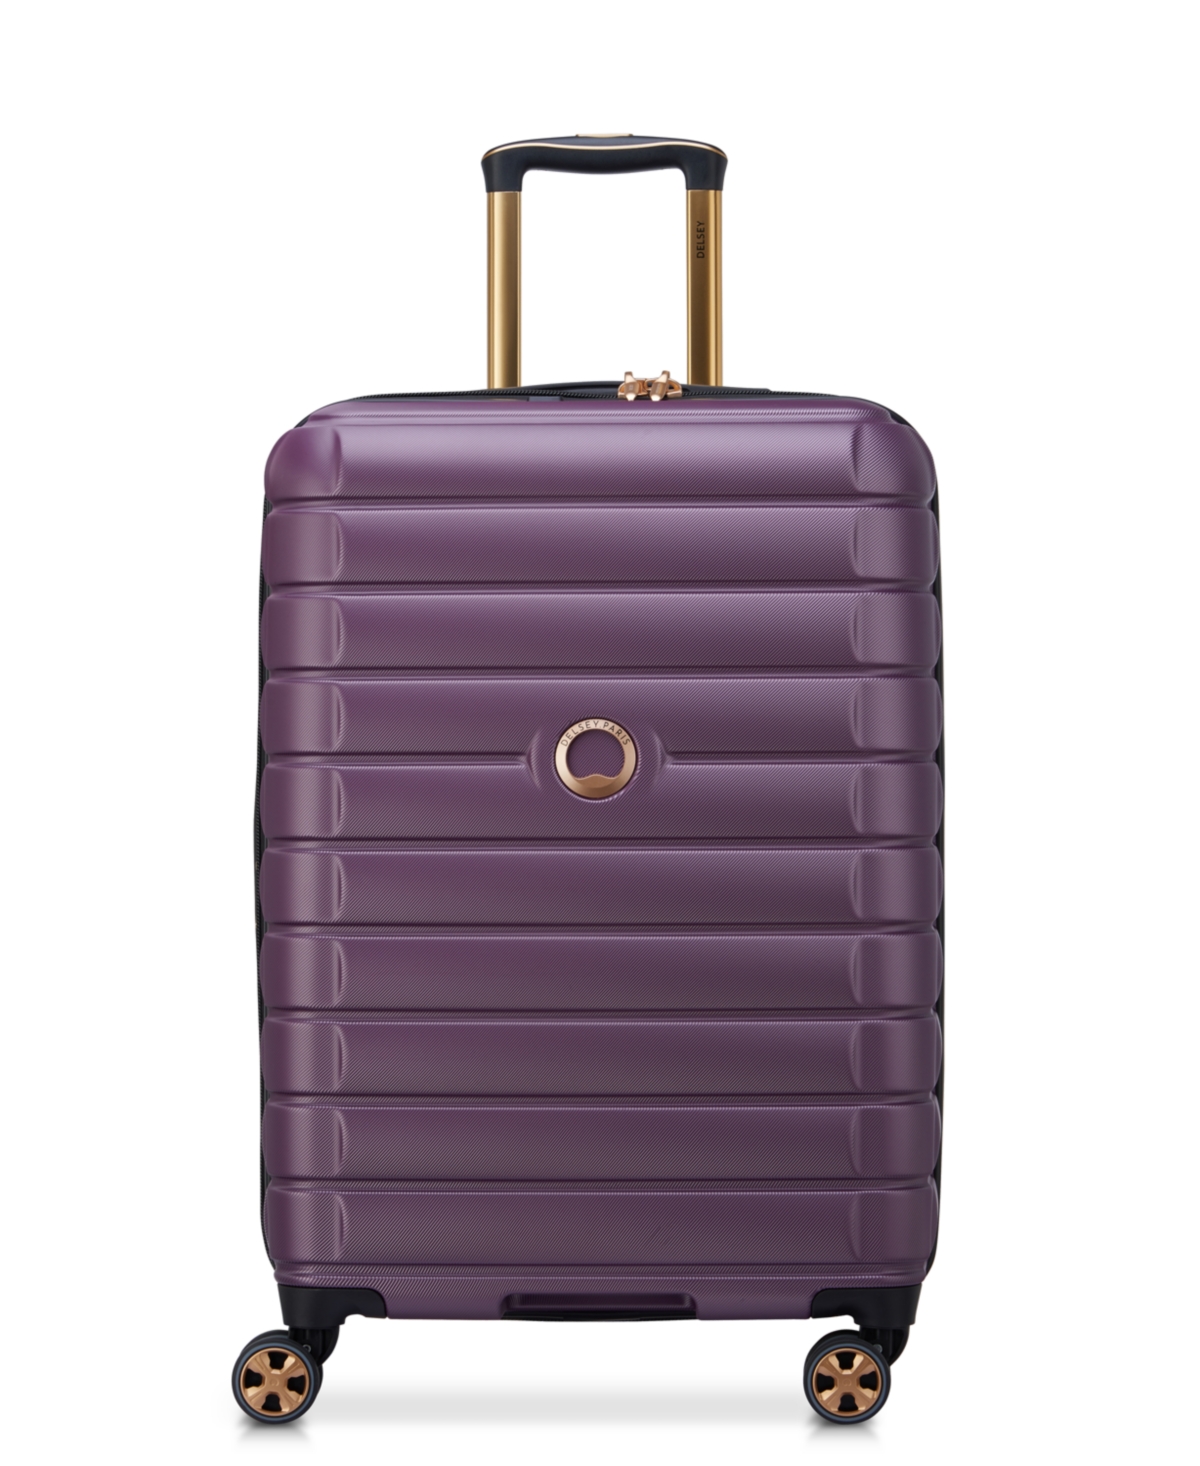 Delsey Shadow 5.0 Expandable 24" Check-in Spinner Luggage In Mauve